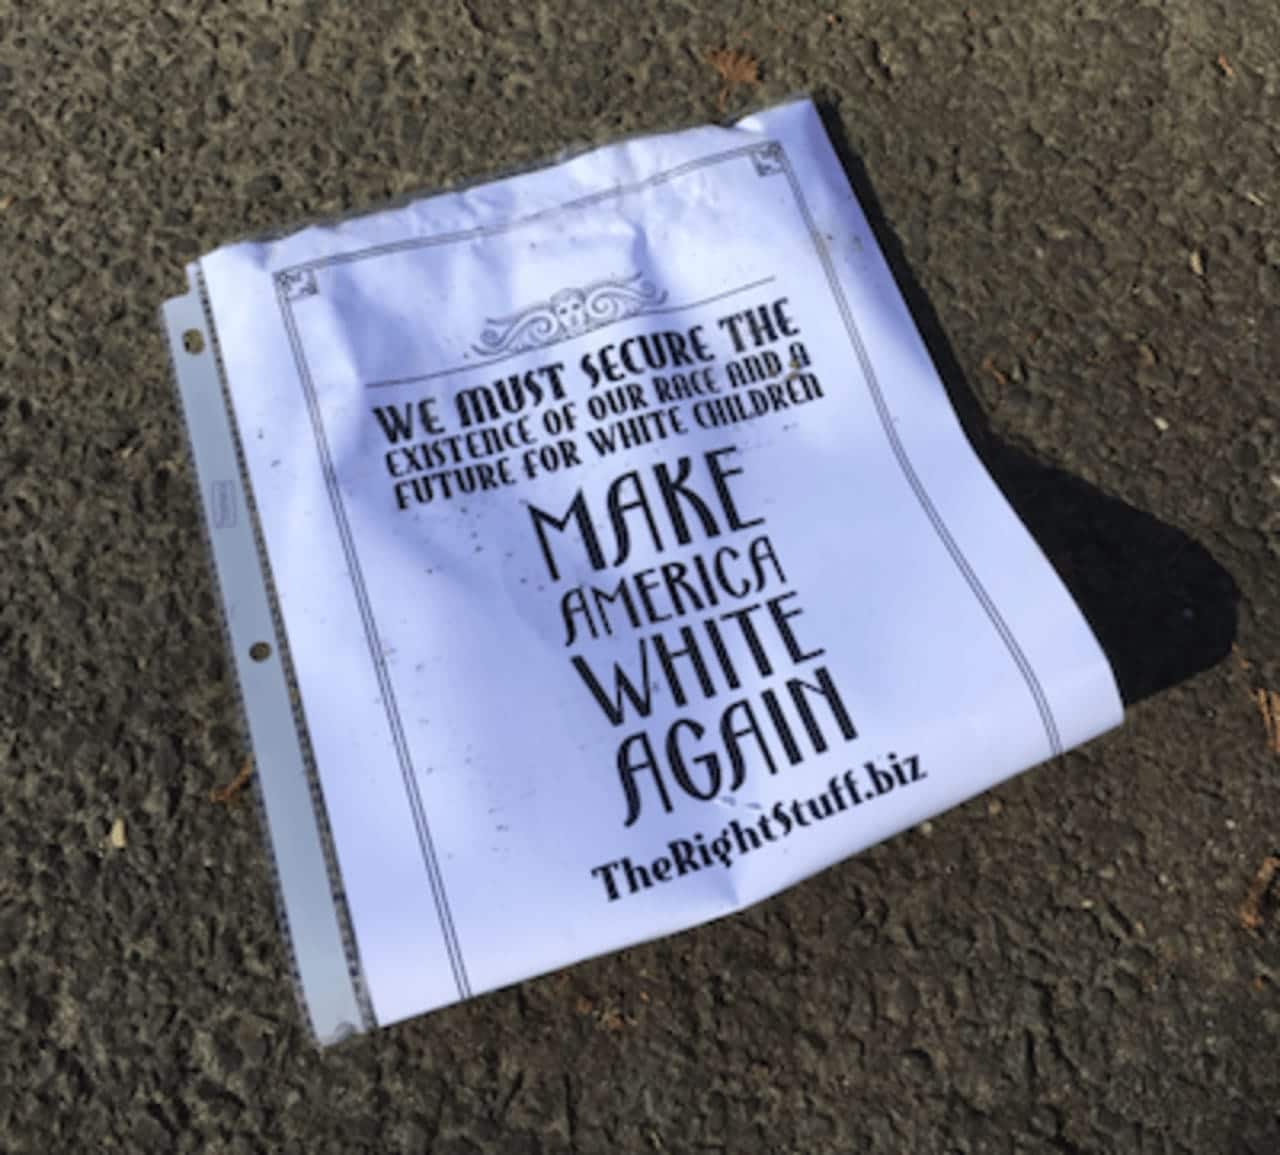 One of five white supremacist fliers found in driveways on Newtown Avenue on Monday morning. Norwalk Police are investigating.